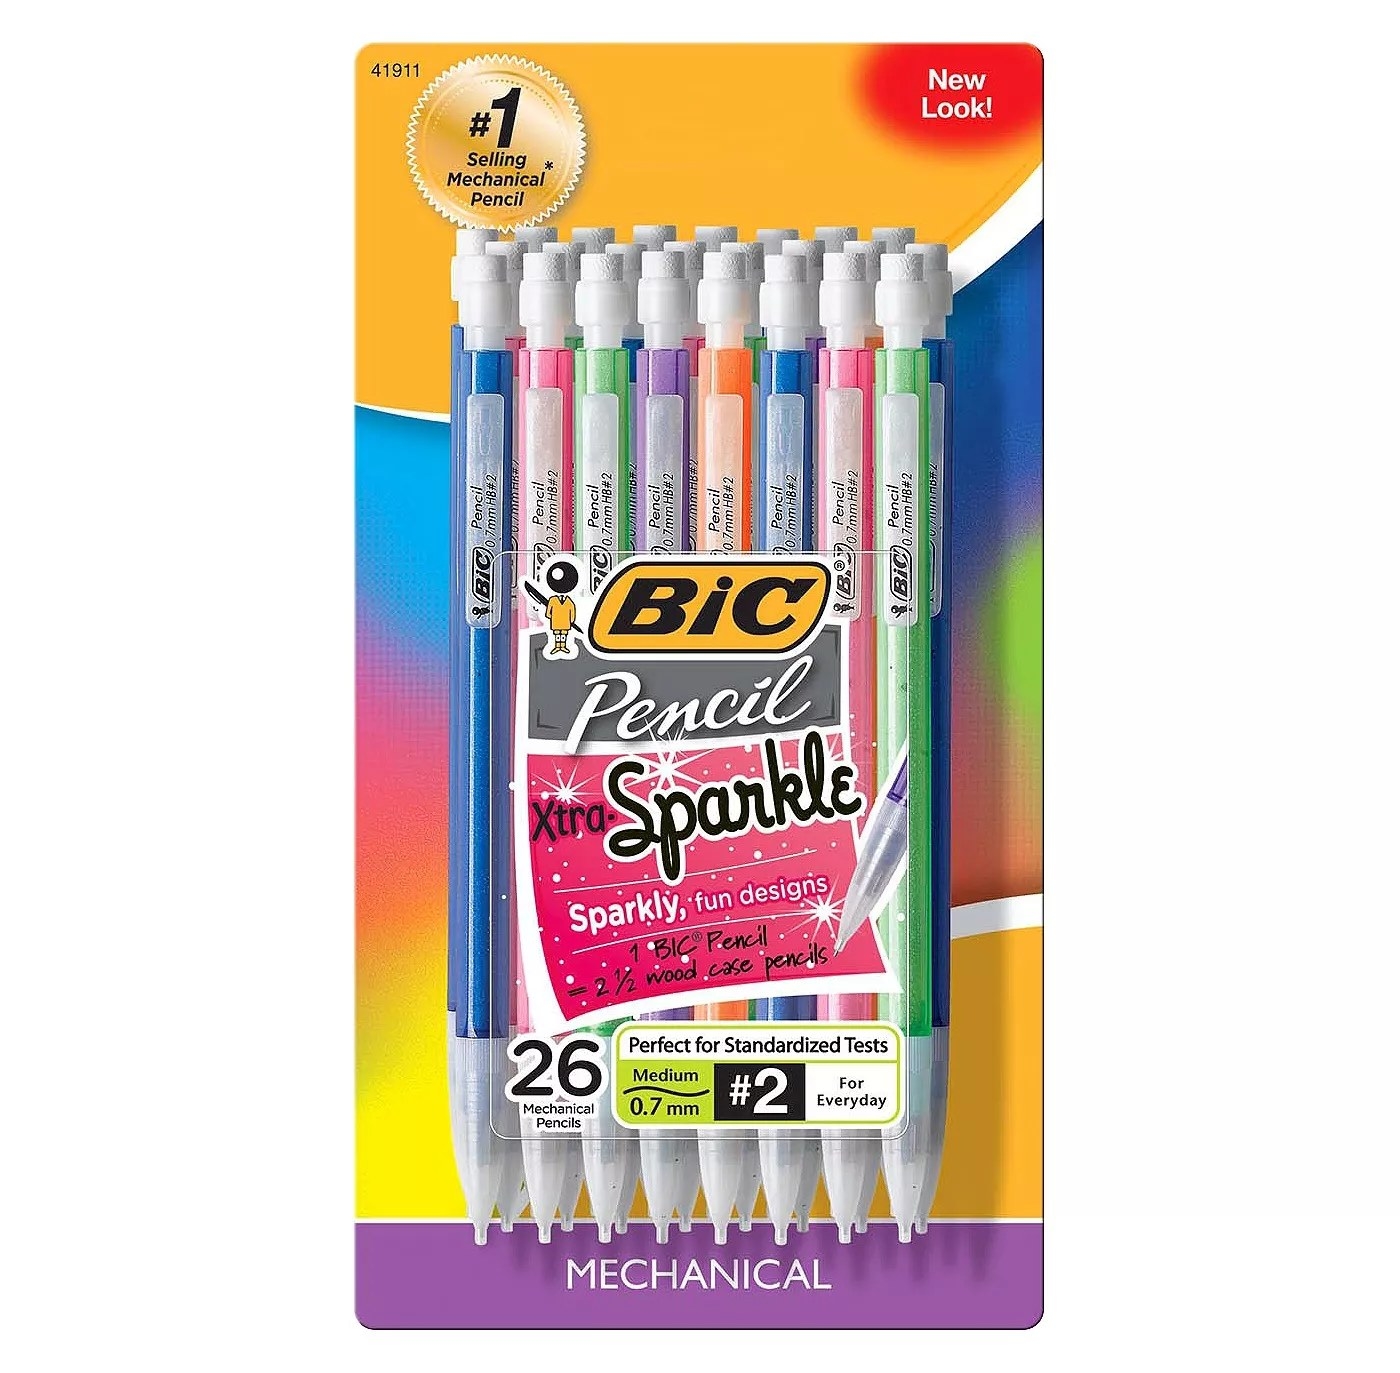 A 26-pack of Big Xtra Sparkle mechanical pencils with medium 0.7 mm lead